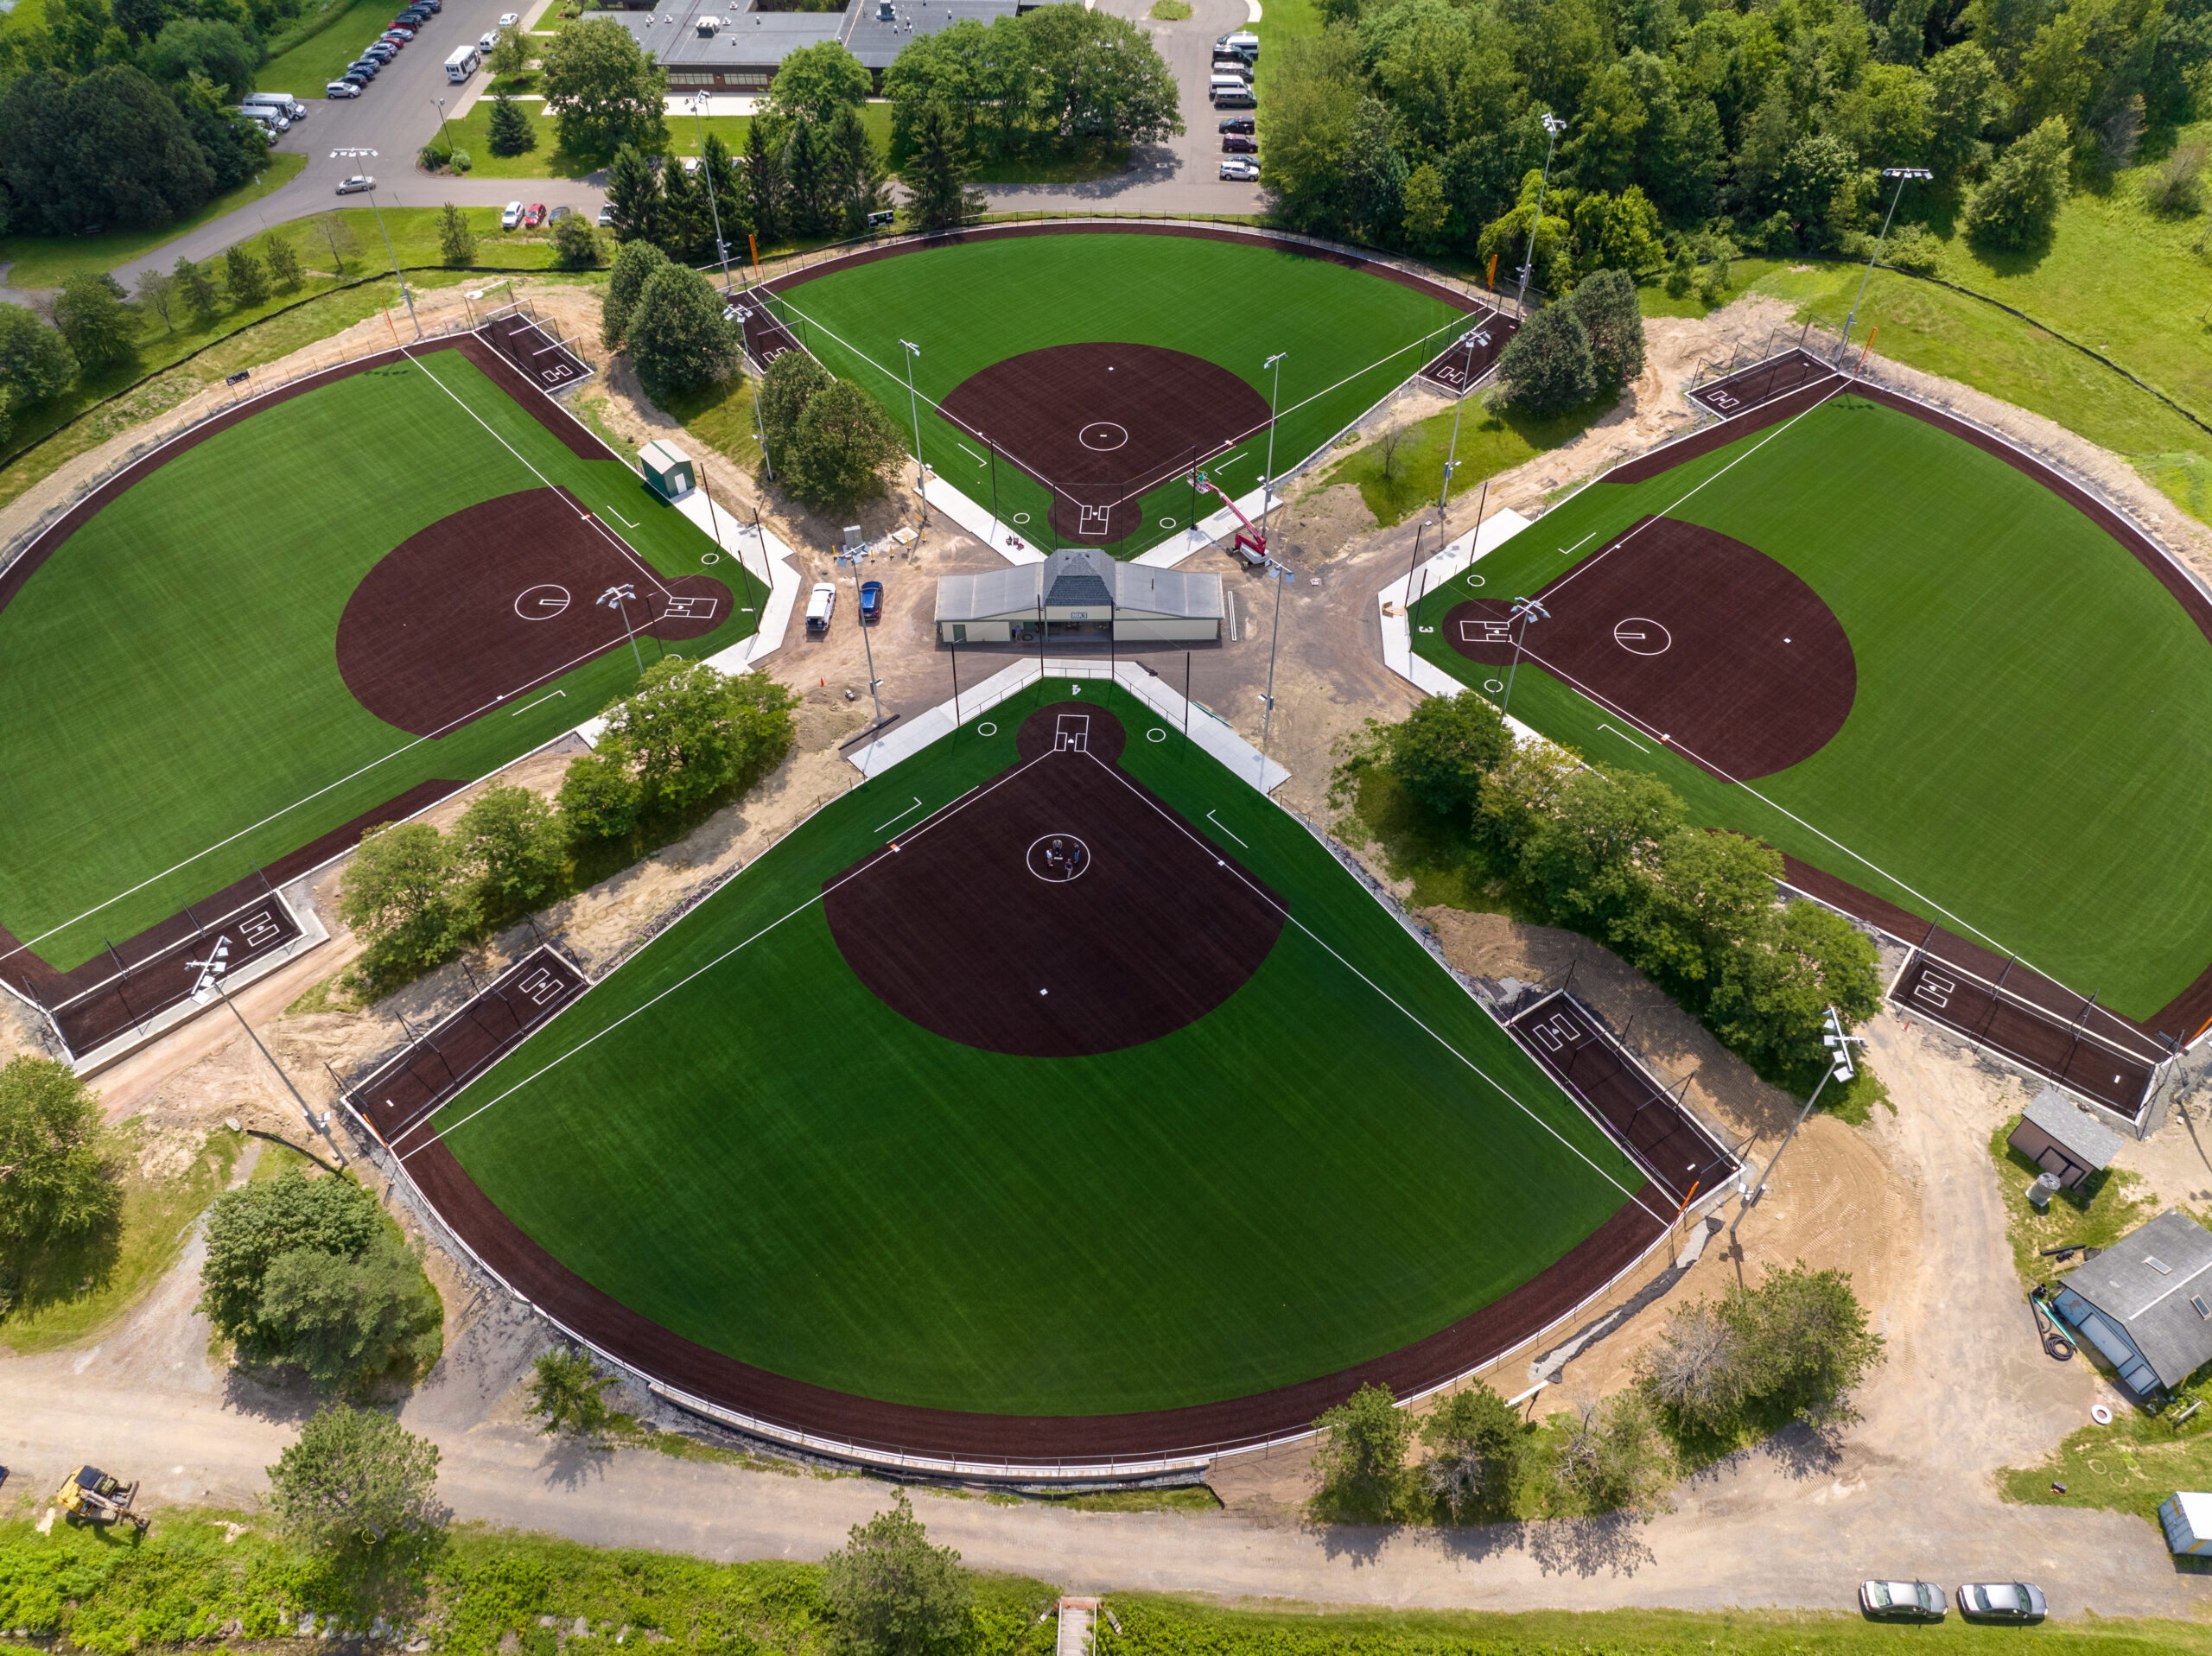 Four baseball diamonds from an aerial view